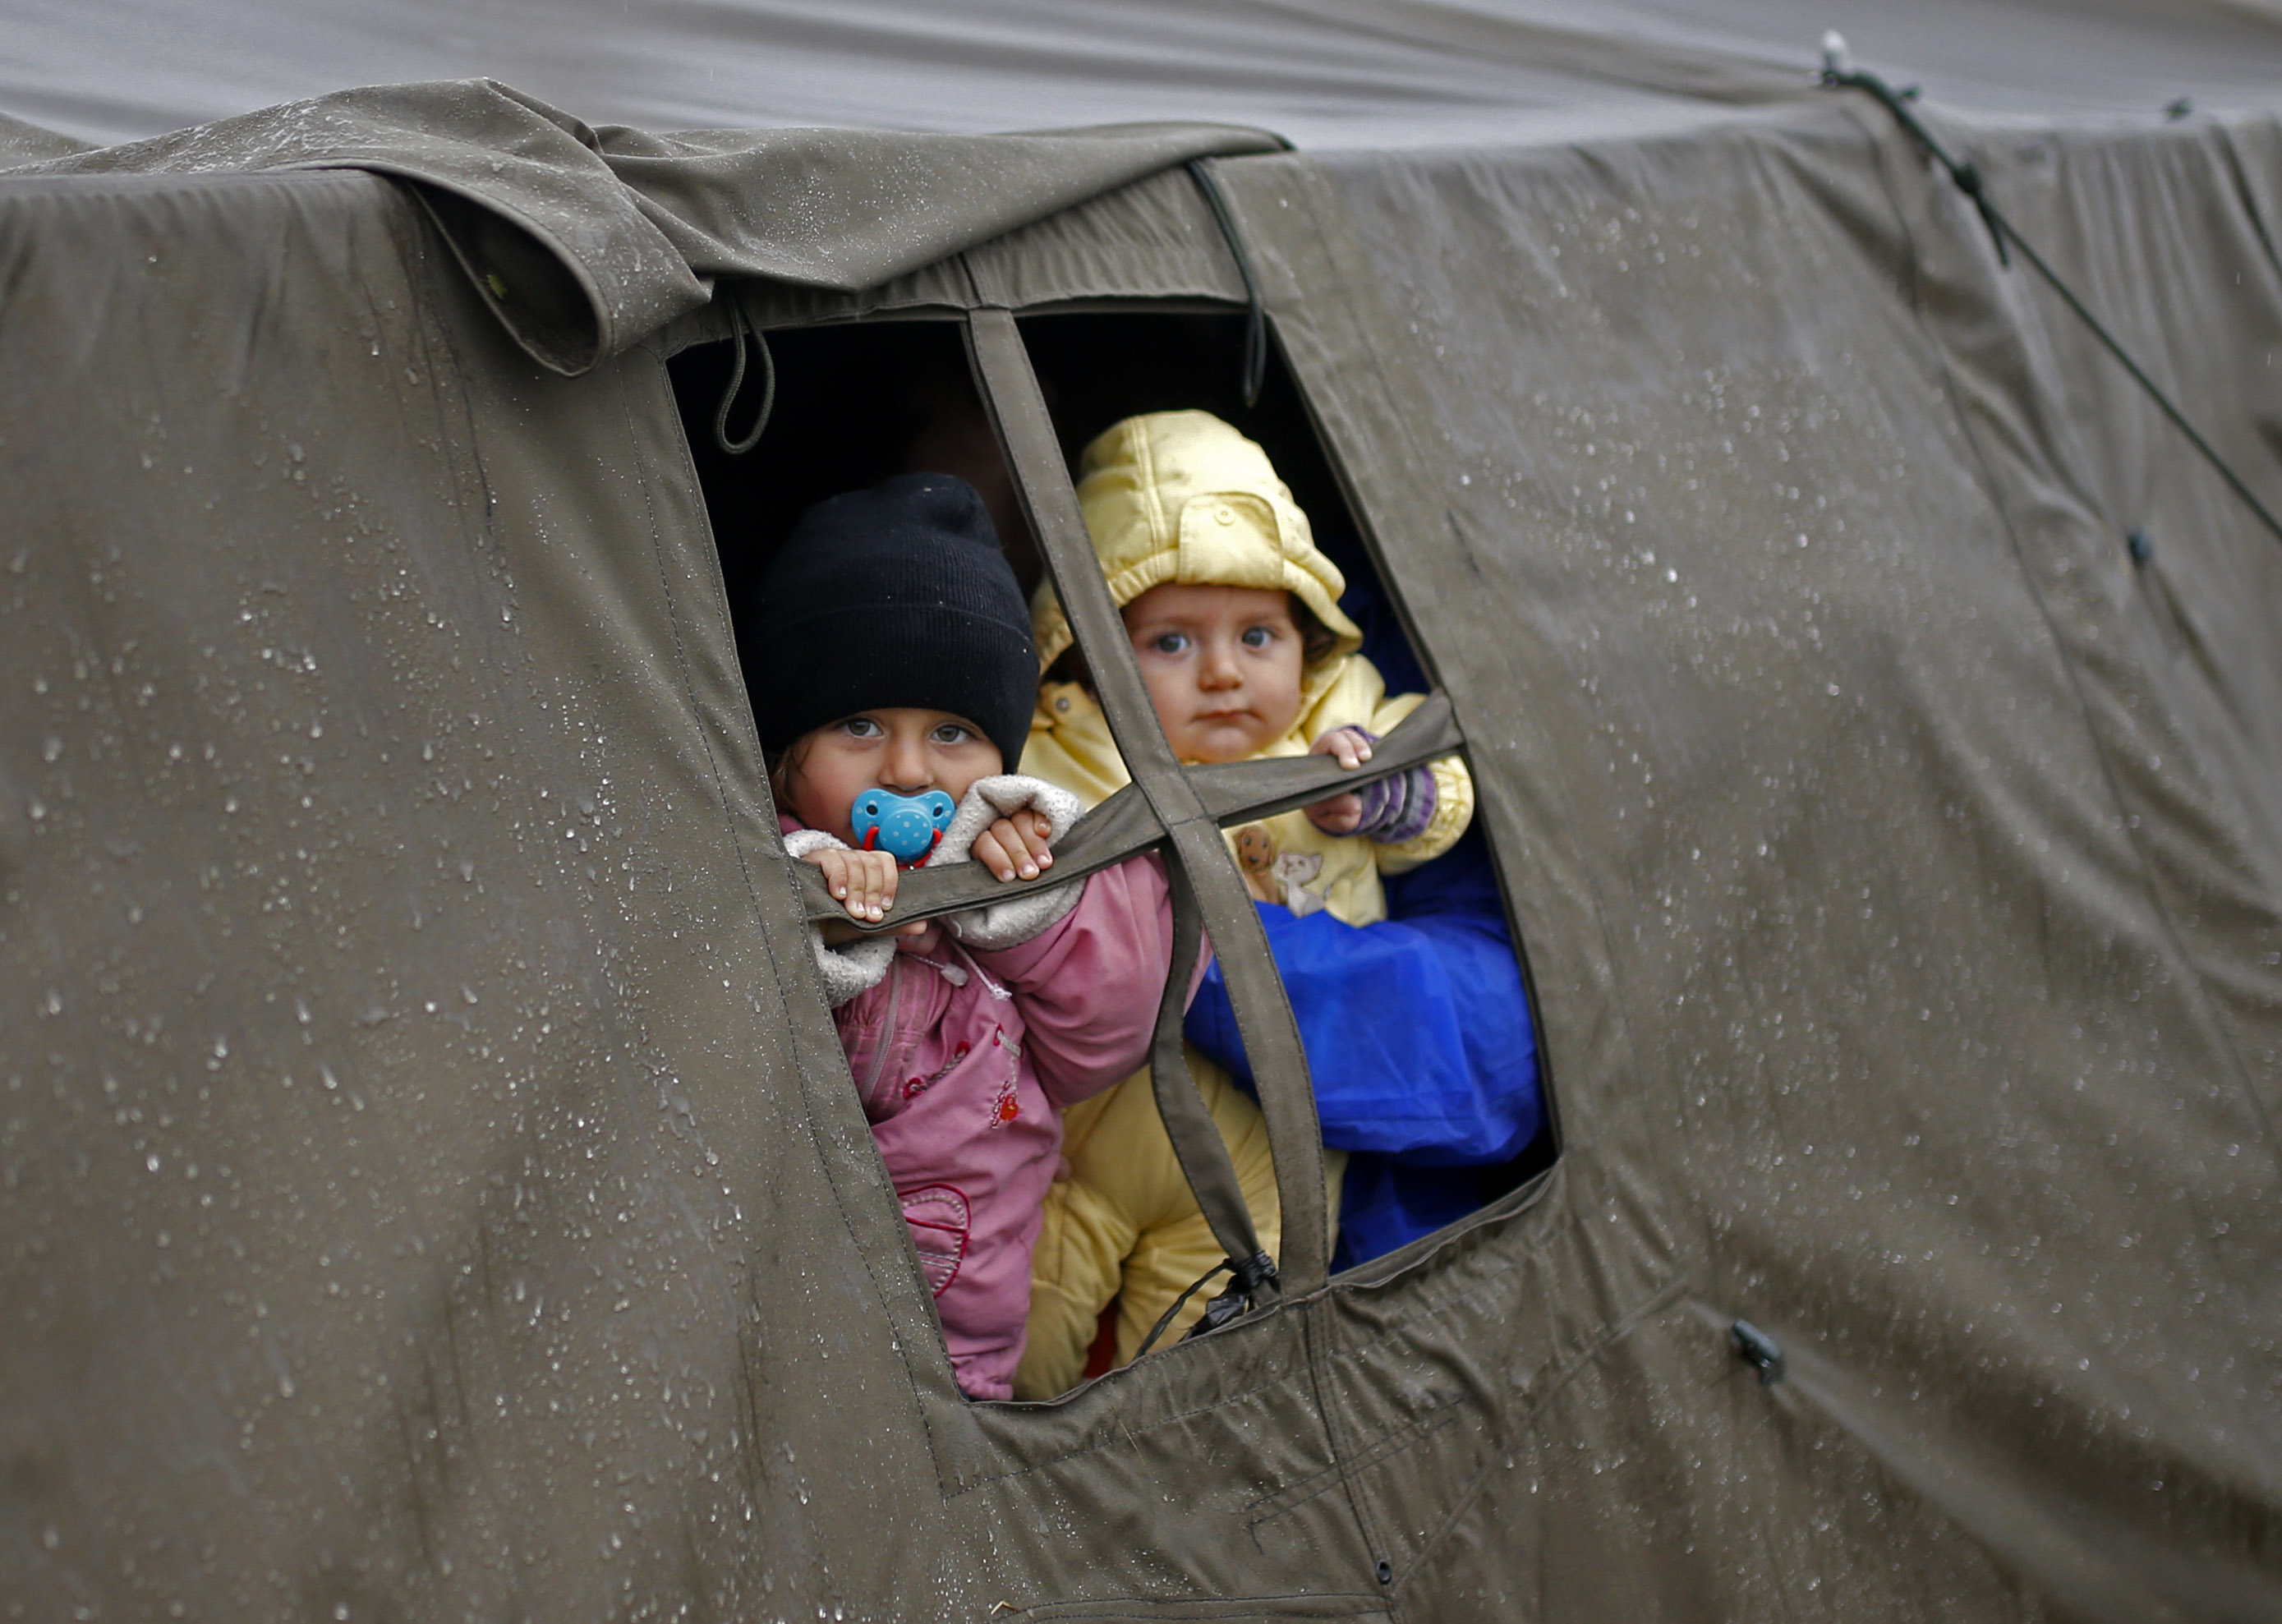 Children look out from a tent at a migrant camp in Opatovac, Croatia October 19, 2015. The Balkans struggled with a growing backlog of migrants on Monday after Hungary sealed its southern border and Slovenia tried to impose a limit, leaving thousands stranded on cold, wet borders where tempers frayed. More than 10,000 were stranded in Serbia, the United Nations refugee agency (UNHCR) said, with more on the way but nowhere to go. REUTERS/Dado Ruvic